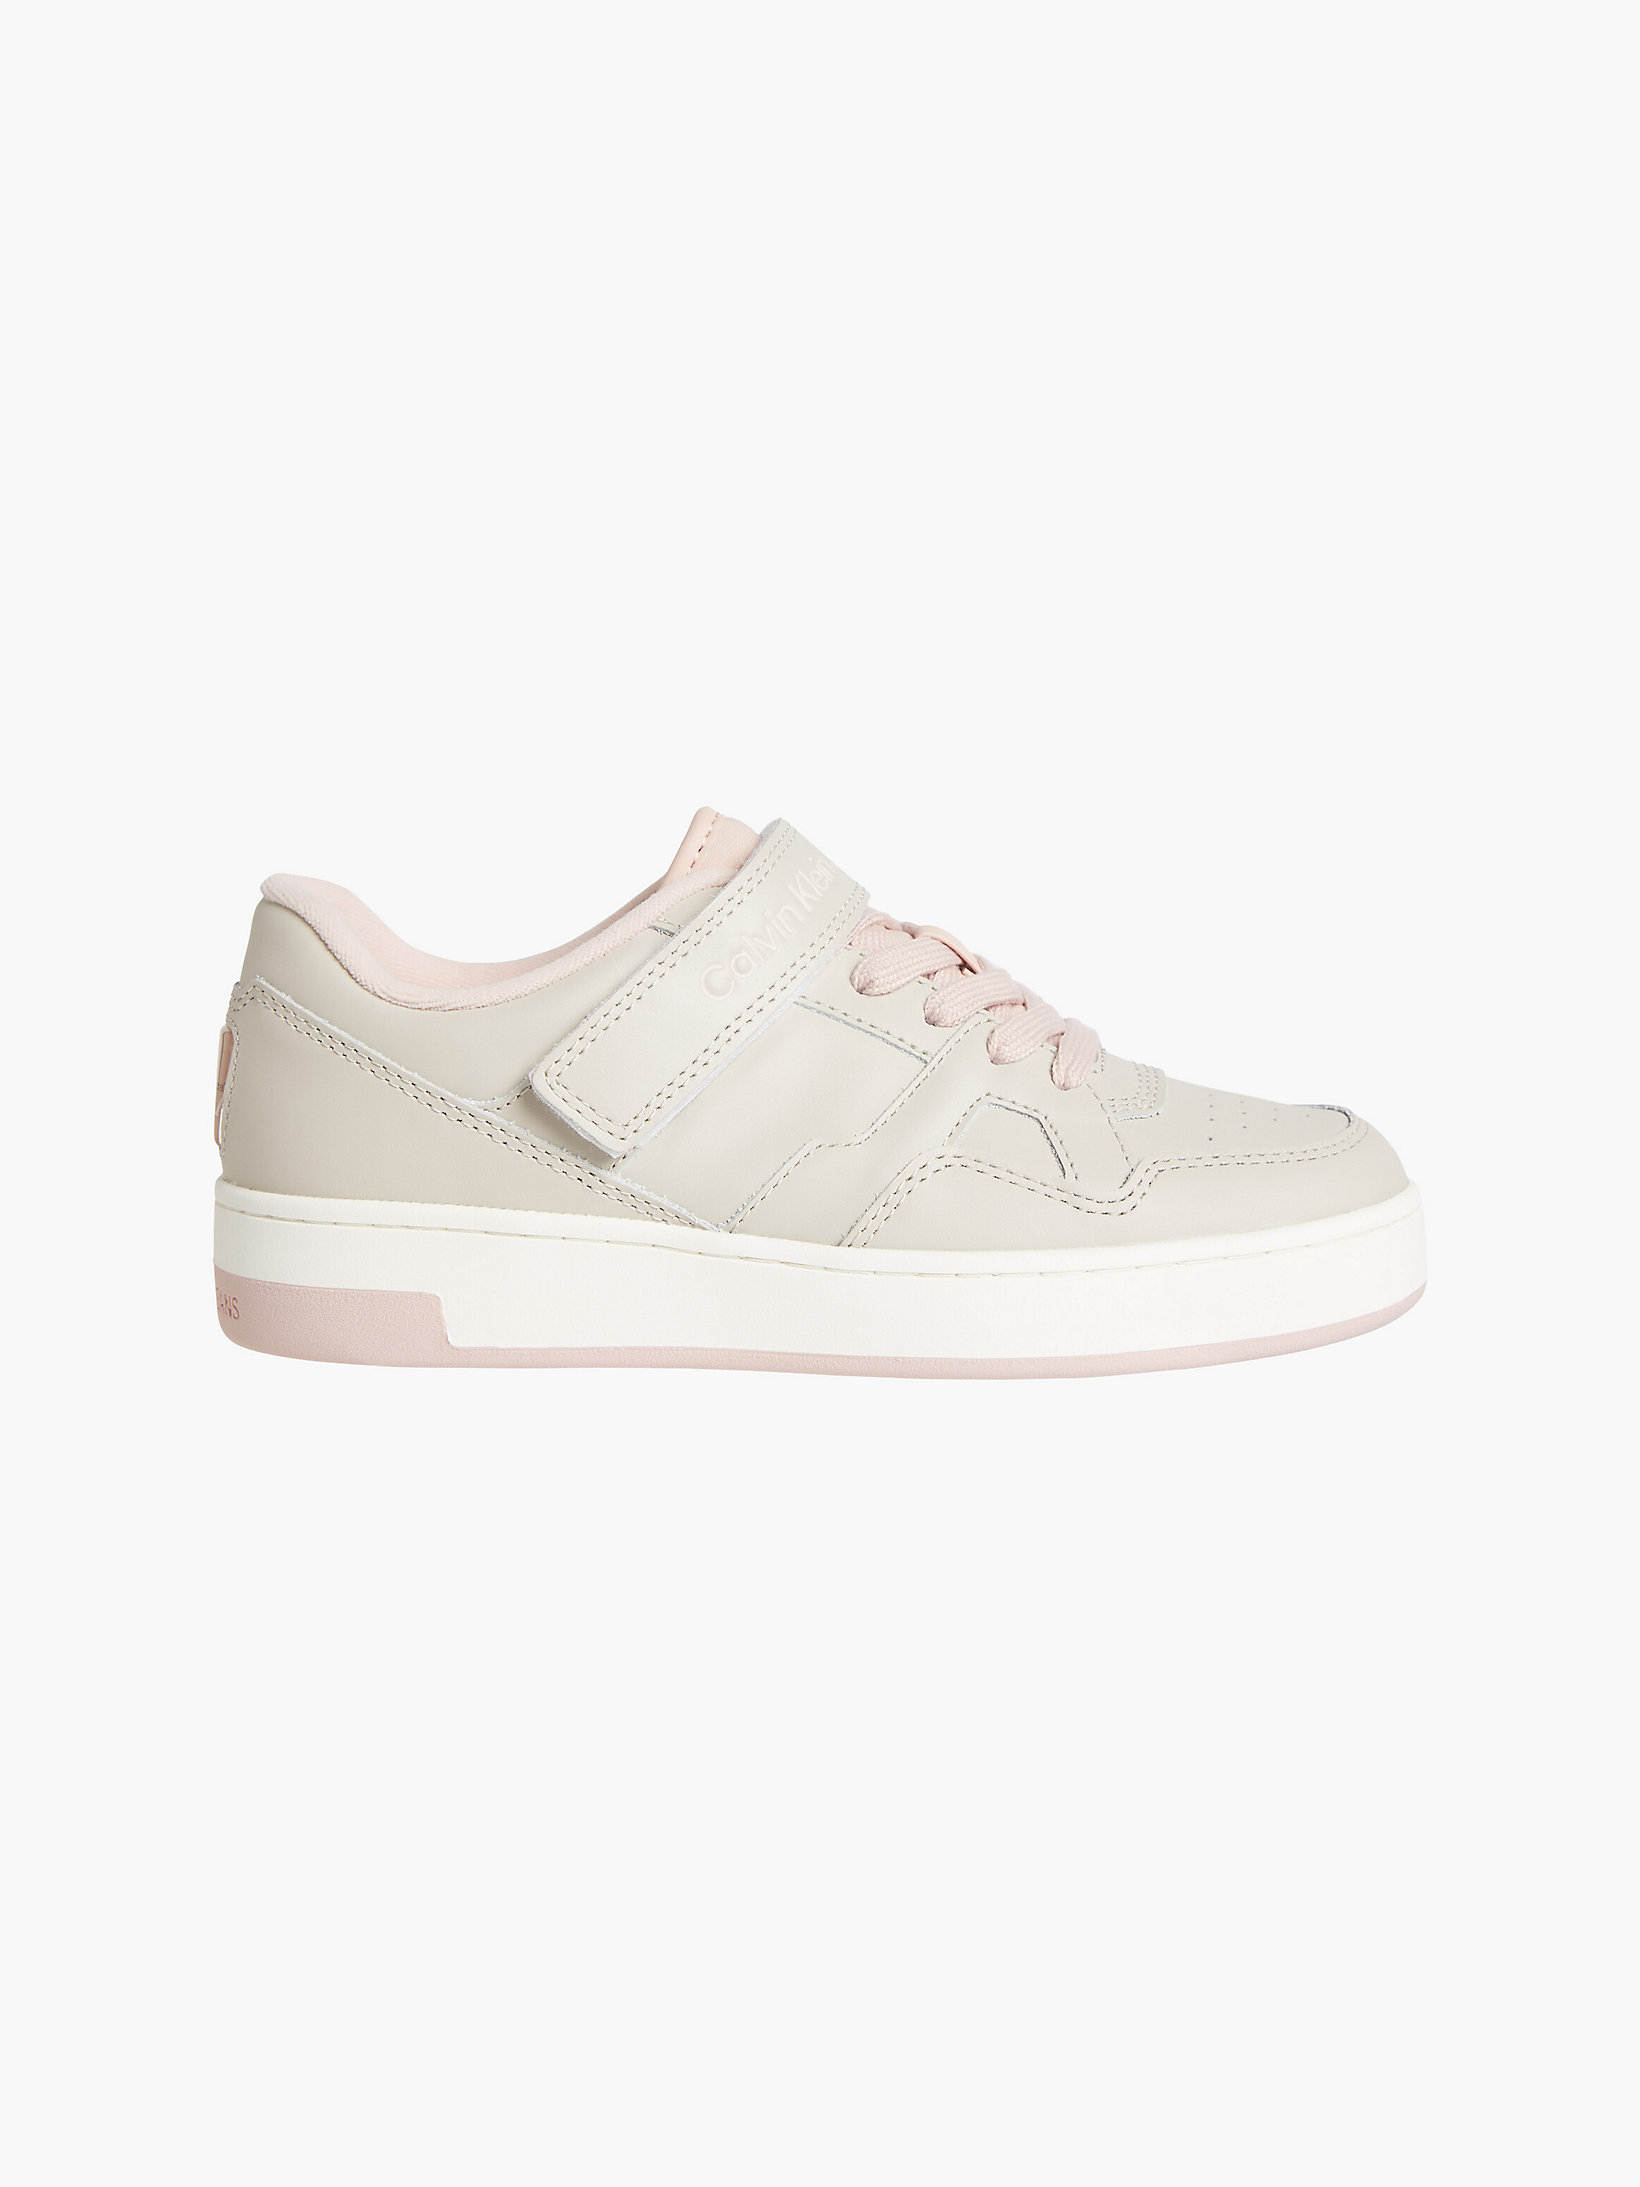 Eggshell/pink Blush Leather Trainers undefined women Calvin Klein